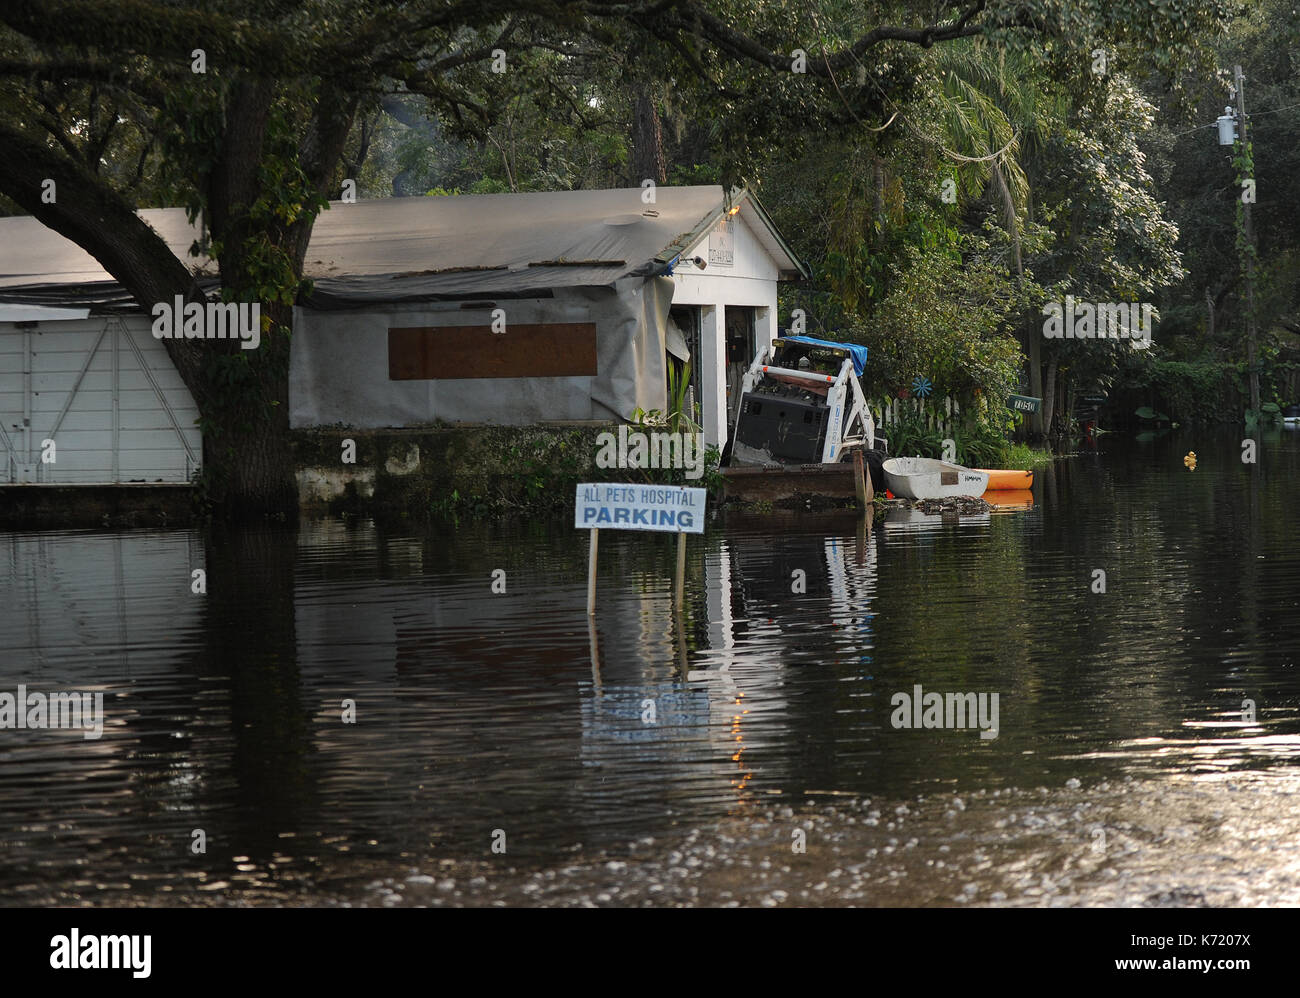 Elfers, United States. 13th Sep, 2017. September 13, 2017- Elfers, Florida, United States - The All Pets Hospital parking lot is seen flooded by water from the nearby Anclote River in Elfers, Florida on September 13, 2017. The river rose to four feet above flood stage in the aftermath of Hurricane Irma. Credit: Paul Hennessy/Alamy Live News Stock Photo